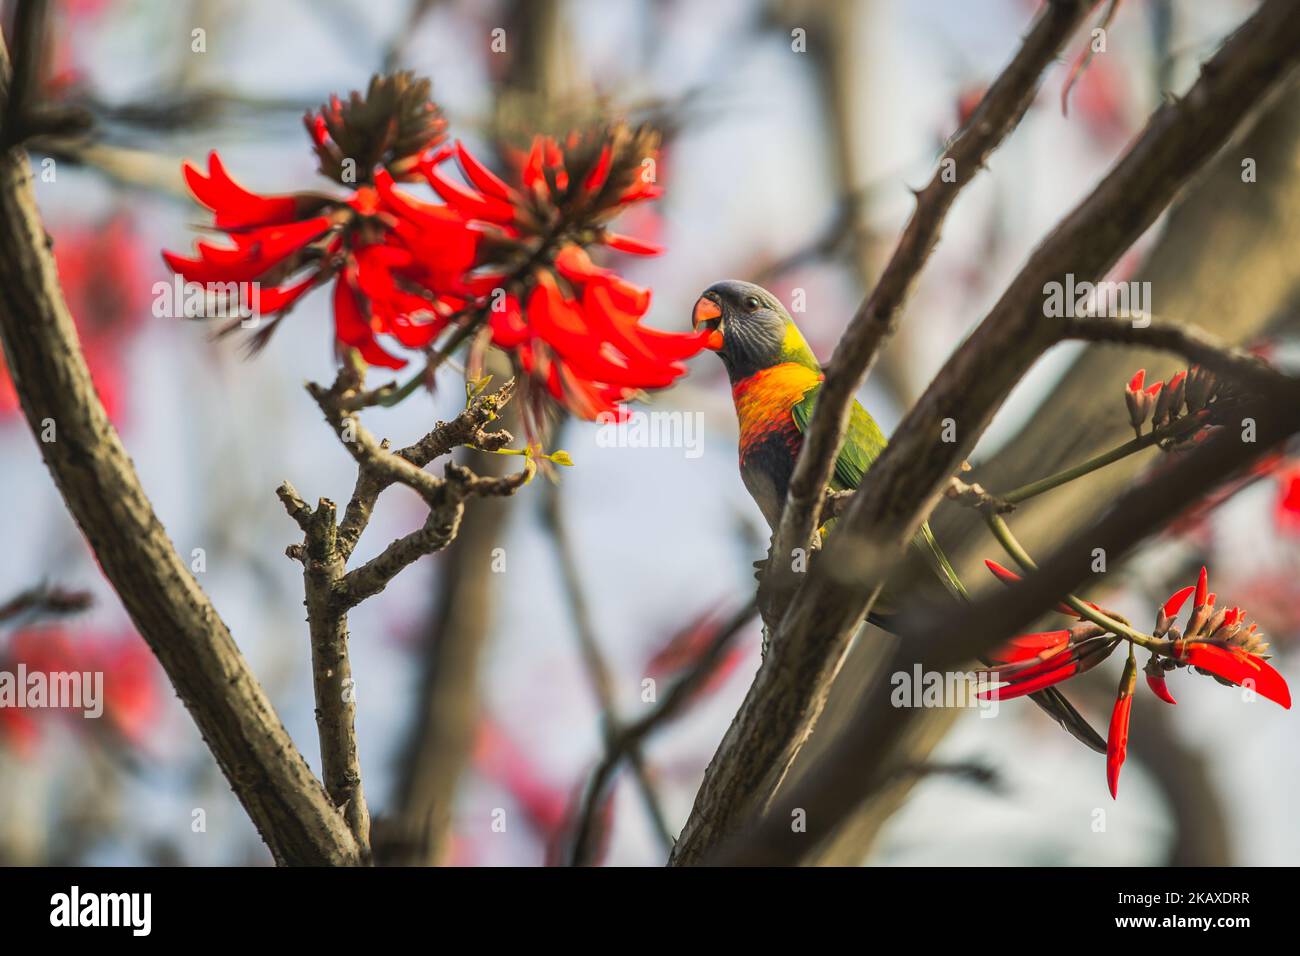 A closeup shot of a Trichoglossus parrot perched on a Erythrina tree Stock Photo